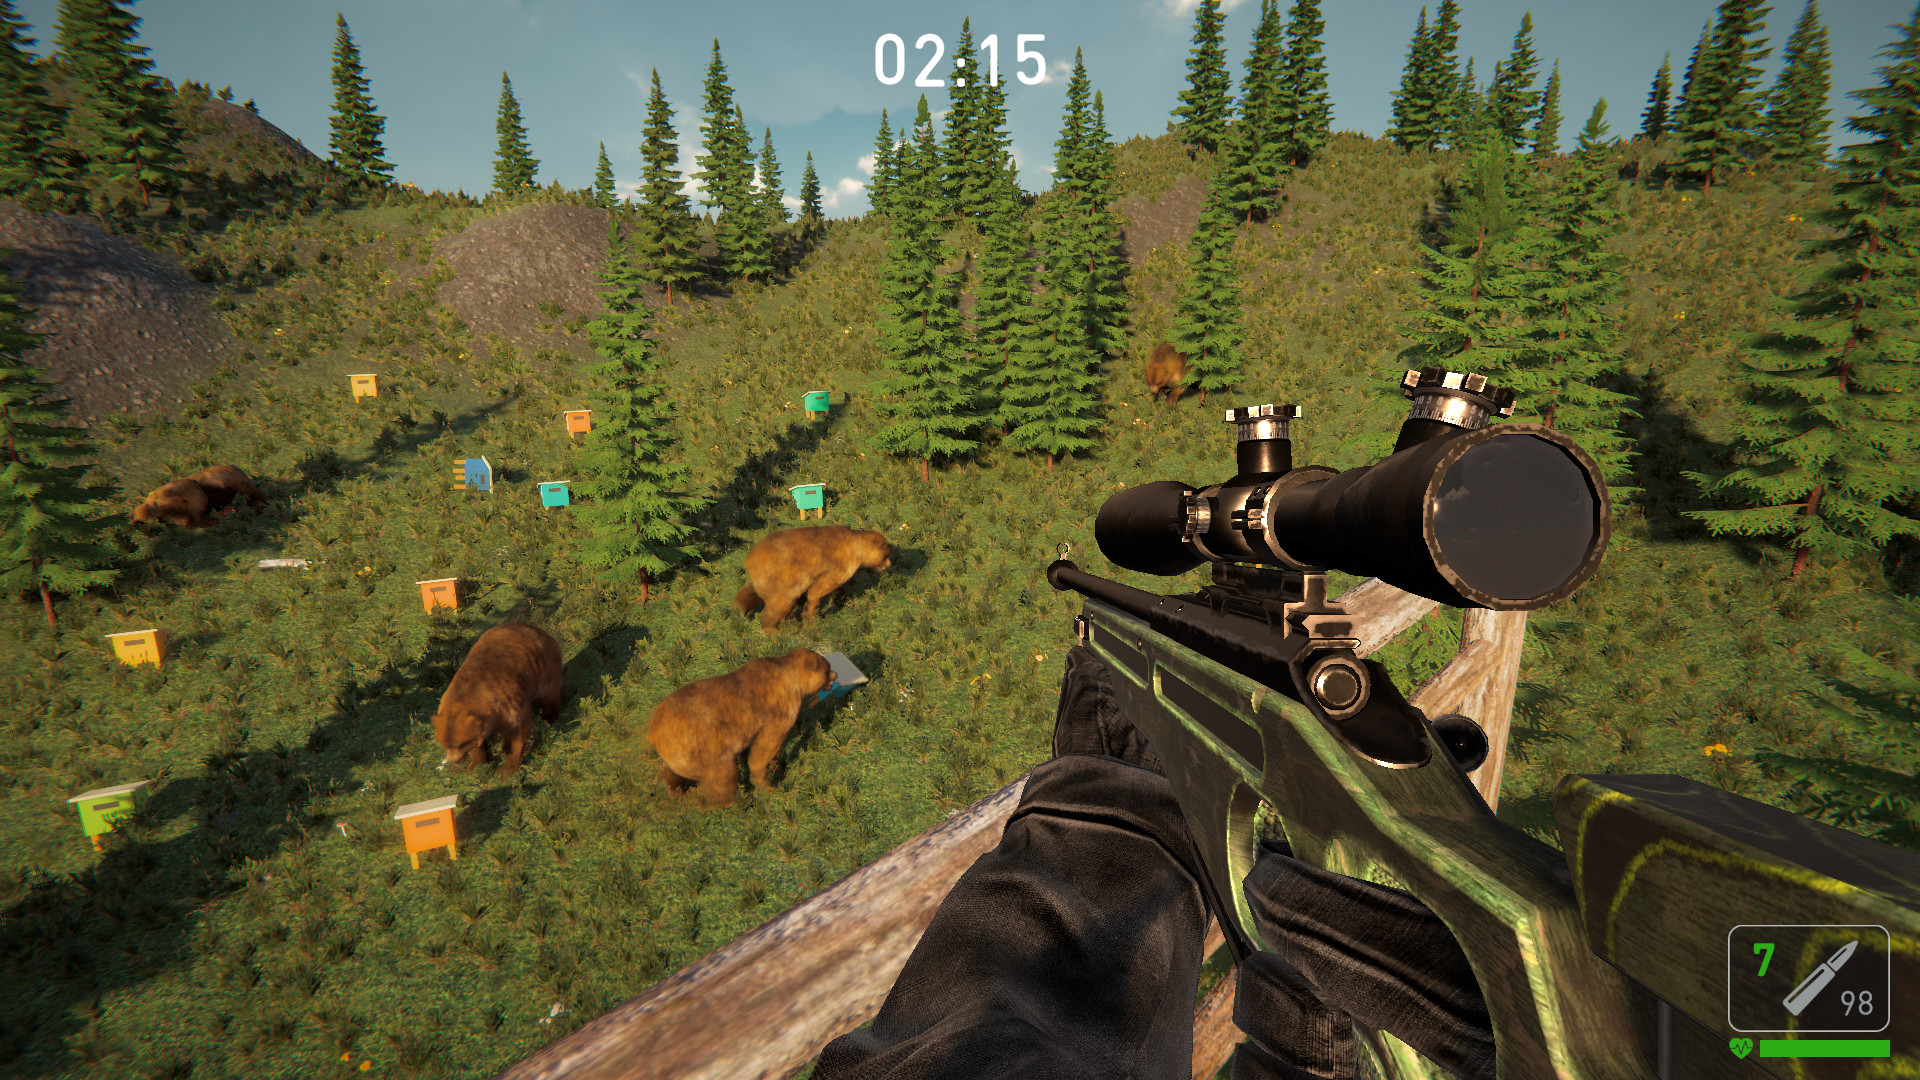 The Mountain Hunting on Steam